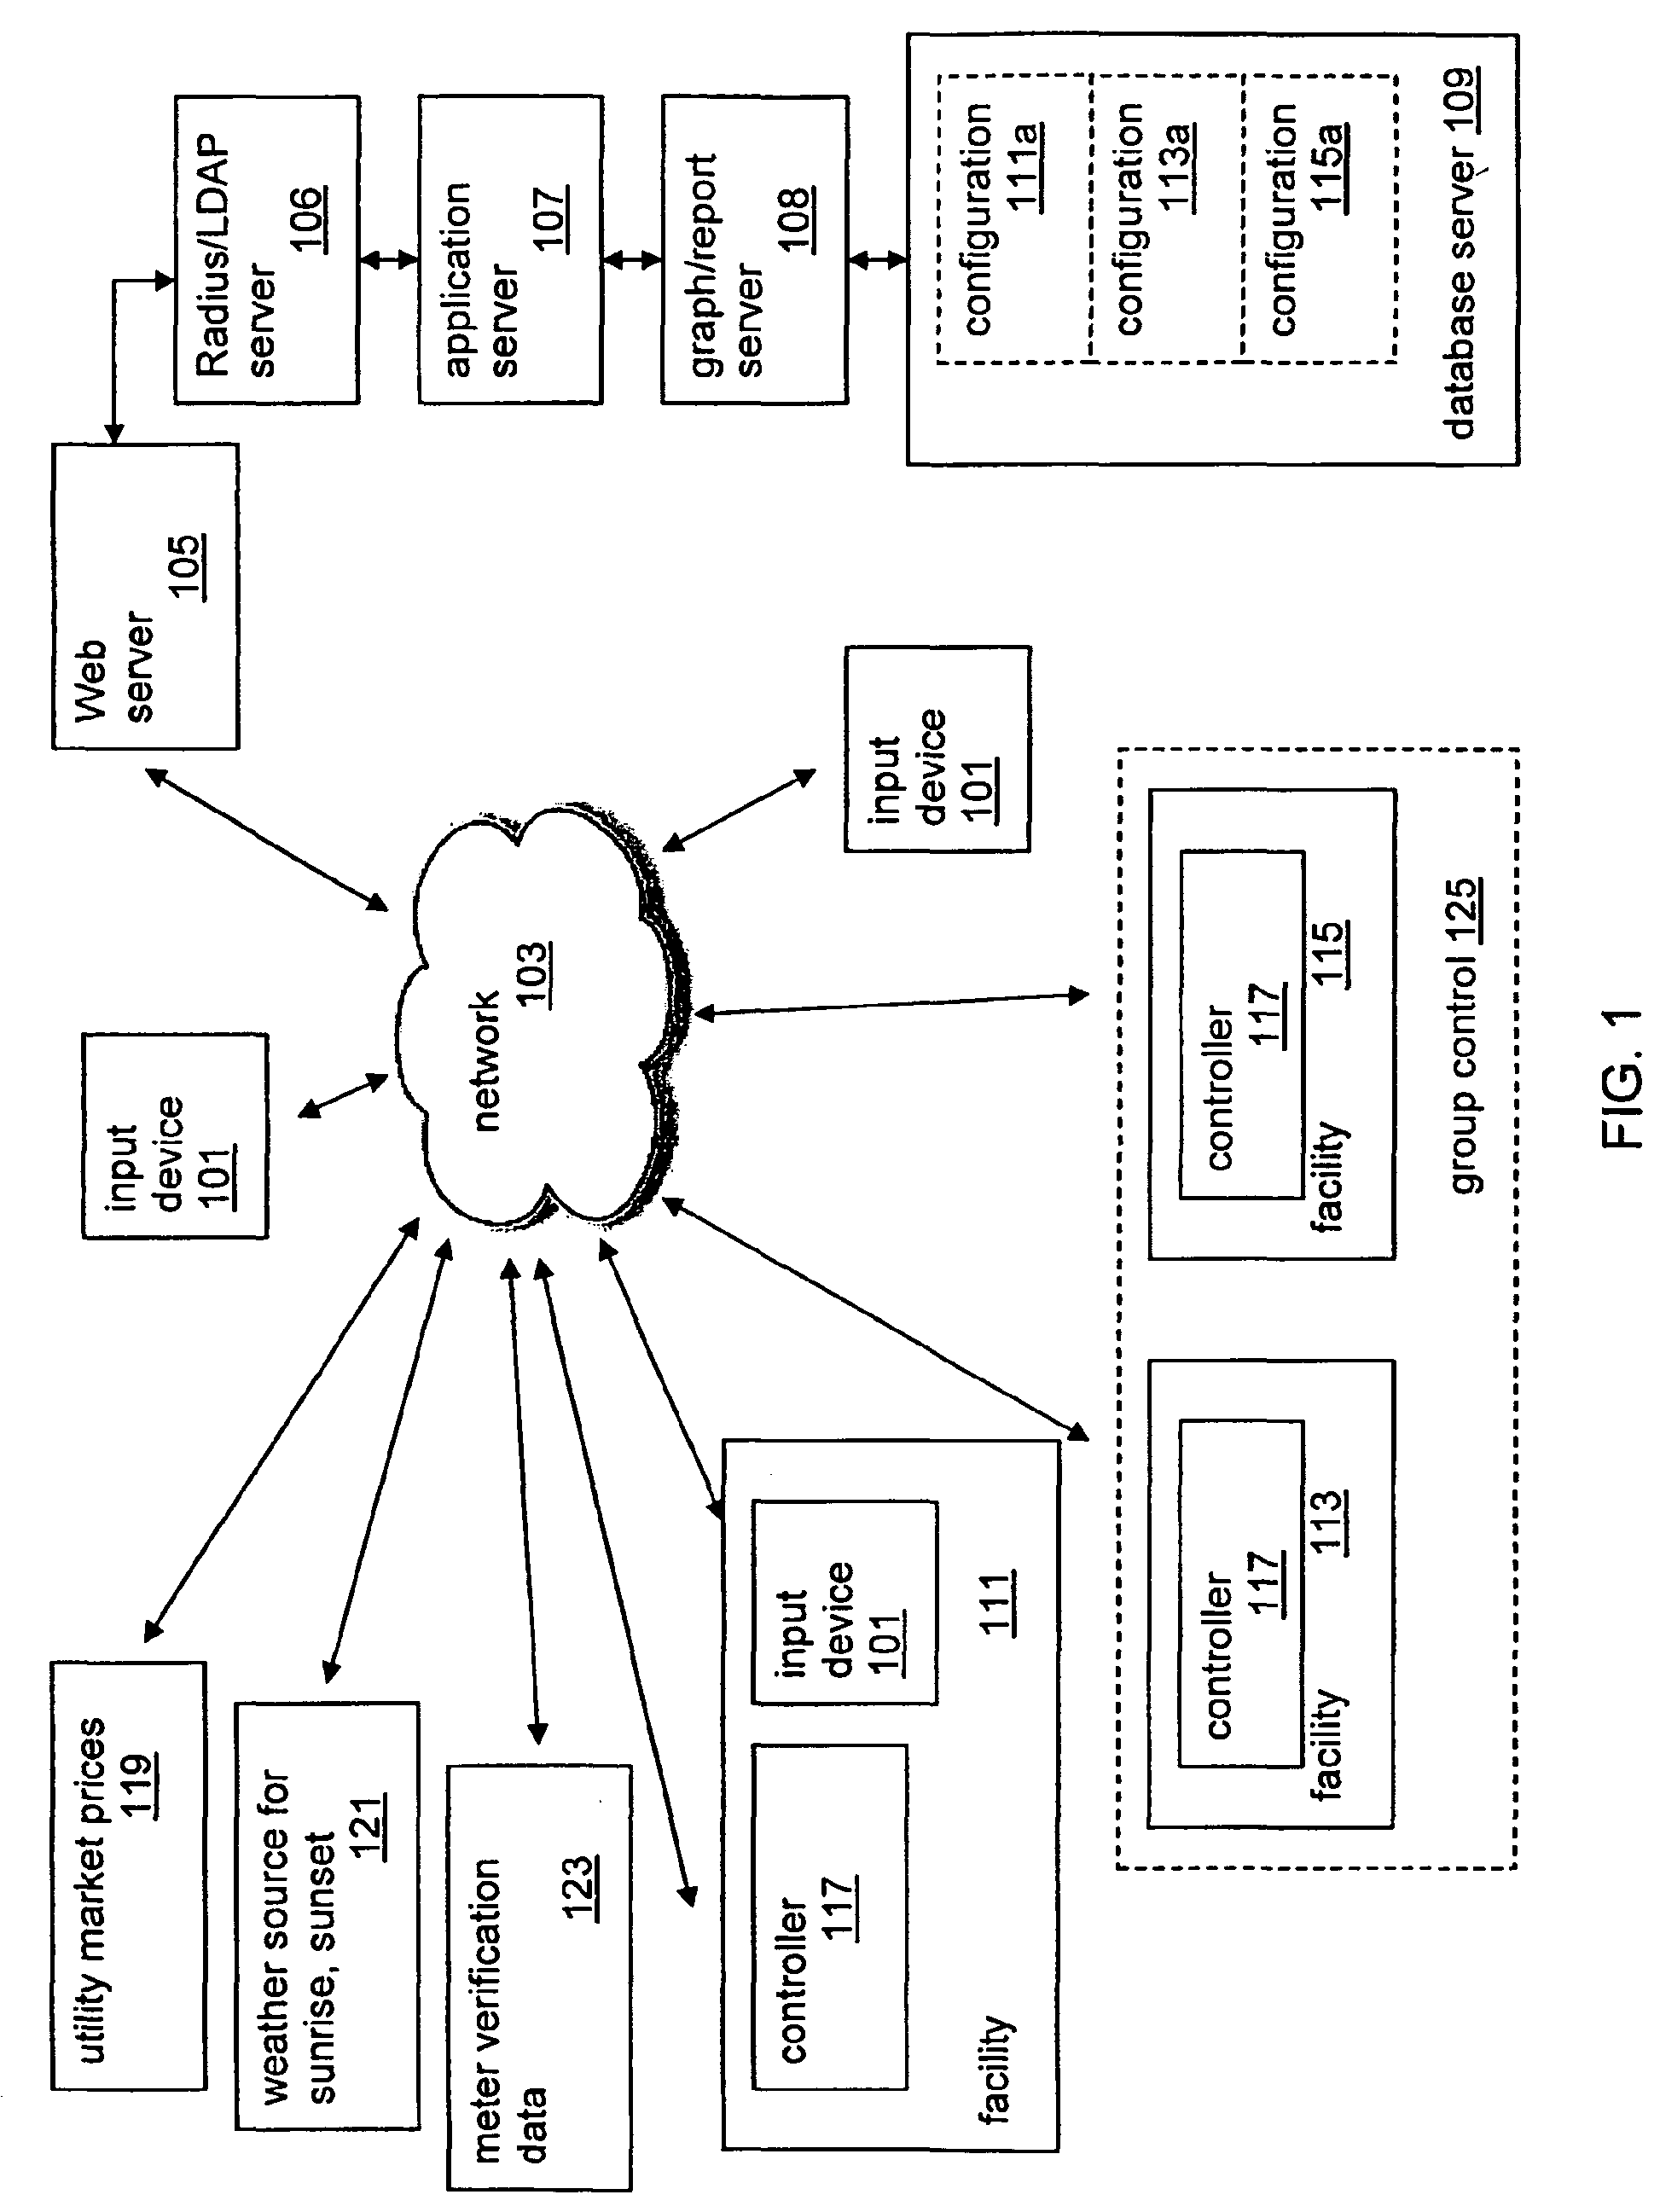 Method and apparatus for controlling power consumption